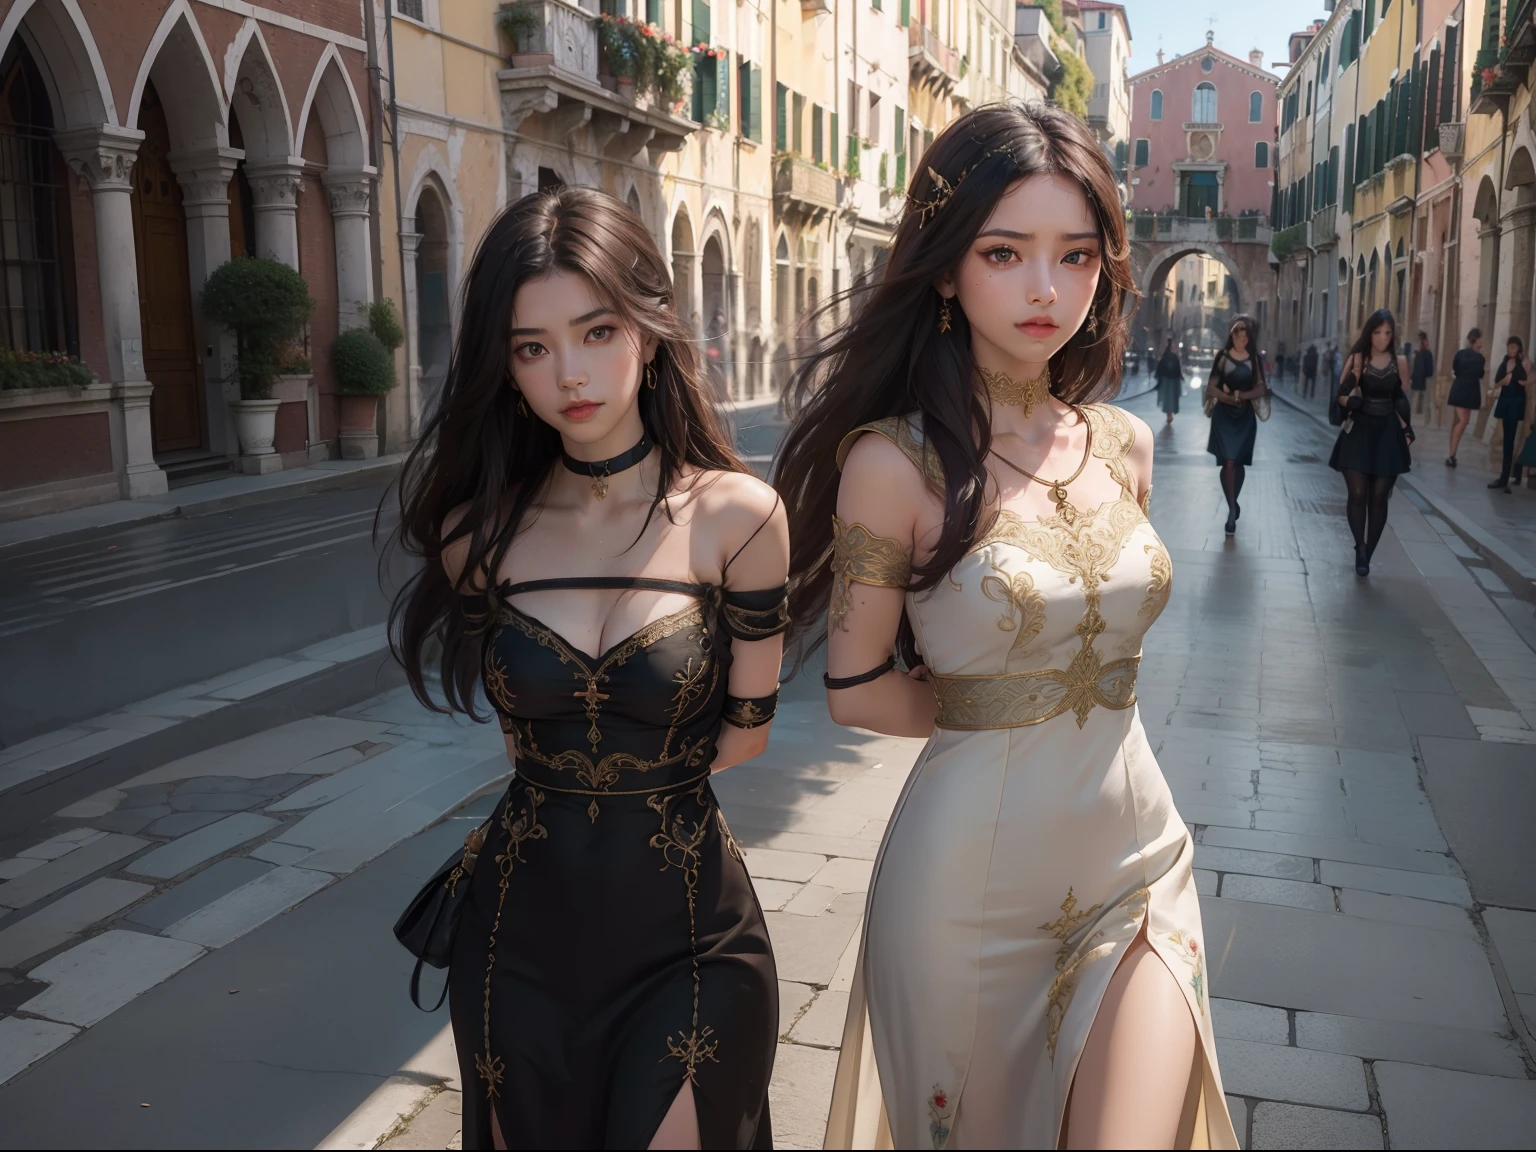 top quality picture　　　、Italy、Venice　、old bridge　、
１５century　、(((Very luxurious embroidered long dress)))　、　Walking　　、(((two womens)))　、　(((Bound arms)))　, (((arms behind back)))
　,　full body Esbian
　 　、Collar with rope　　、(((distressed look)))　、Thin ropes that bind the body　、chains　、Pale green walls　、 Black hair　、low angles　、 shining beautiful skin , Sweat, collar and chain accessories, beautiful black pupil and hair, Detailed expression　, beautidful eyes,